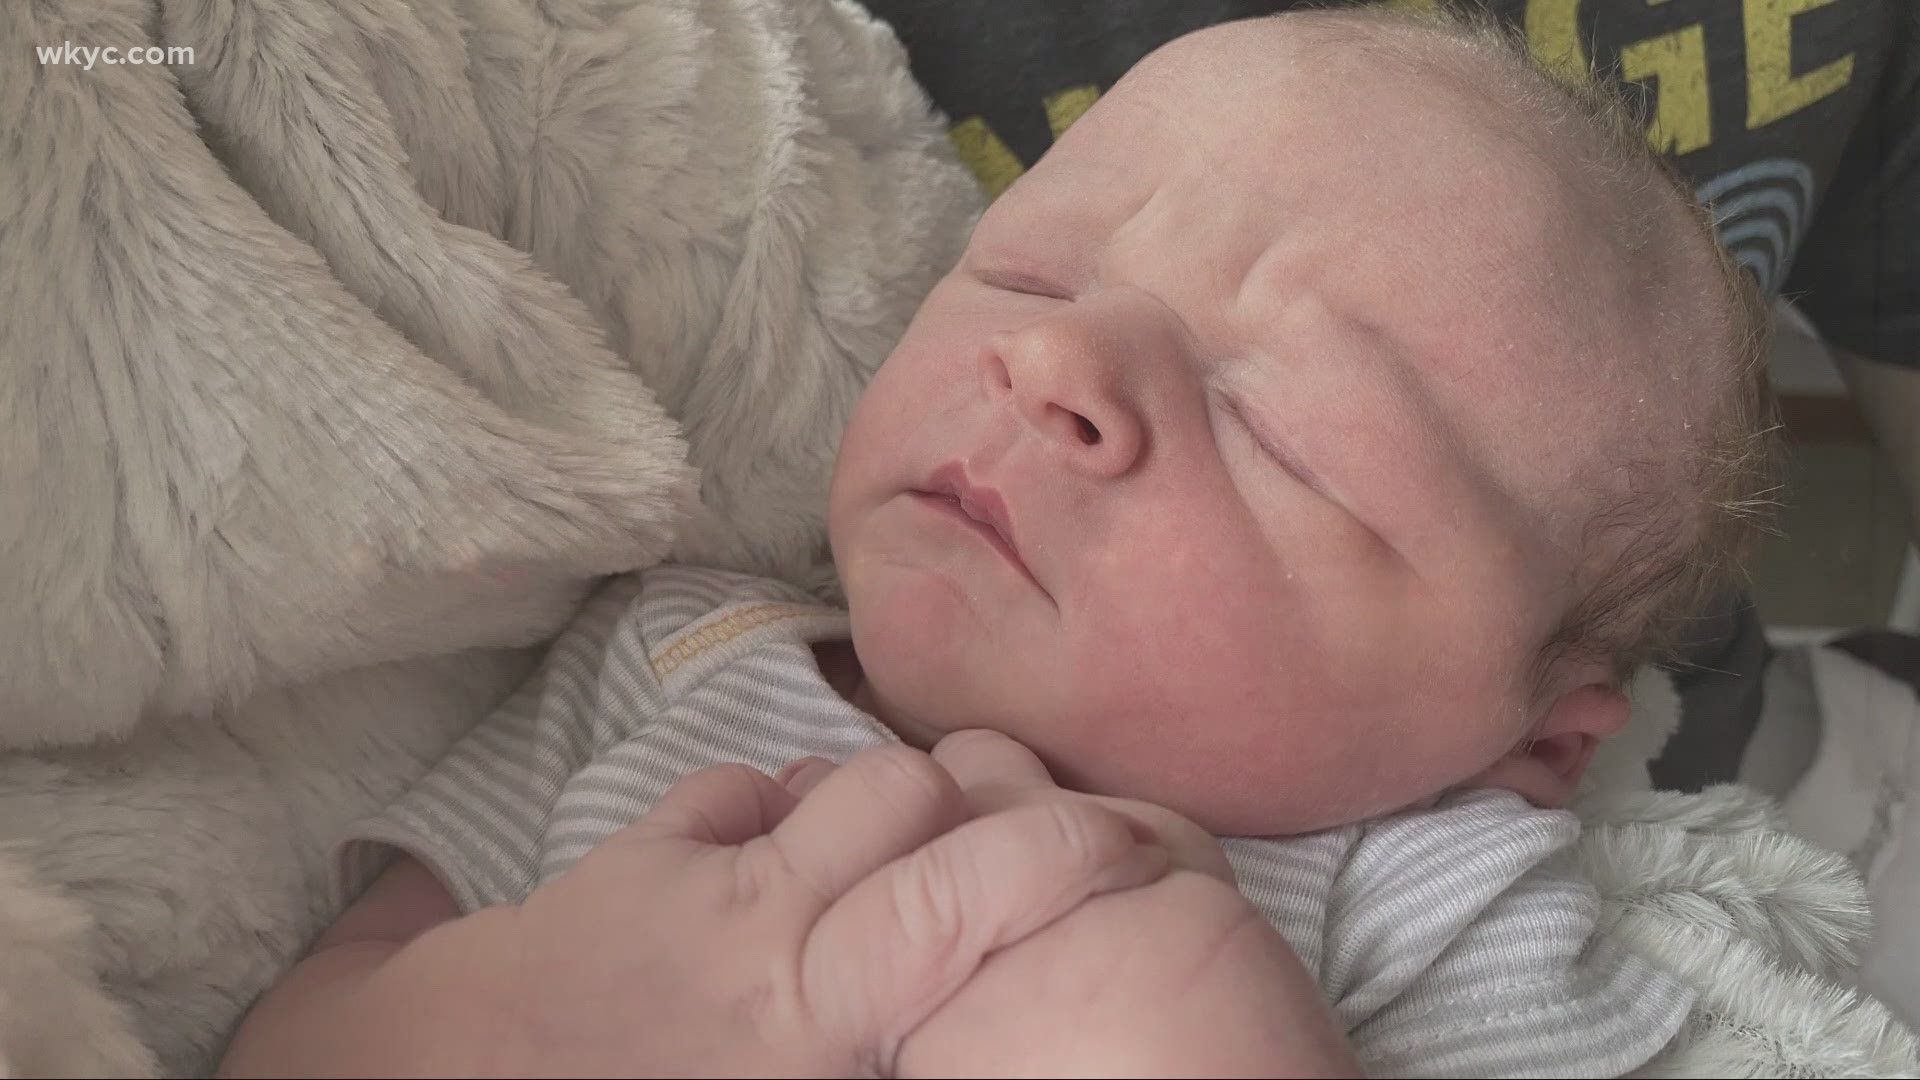 Meet the little pandemic baby, who decided to come into the world, during the season's first snowstorm in Northeast Ohio. Monica Robins reports.